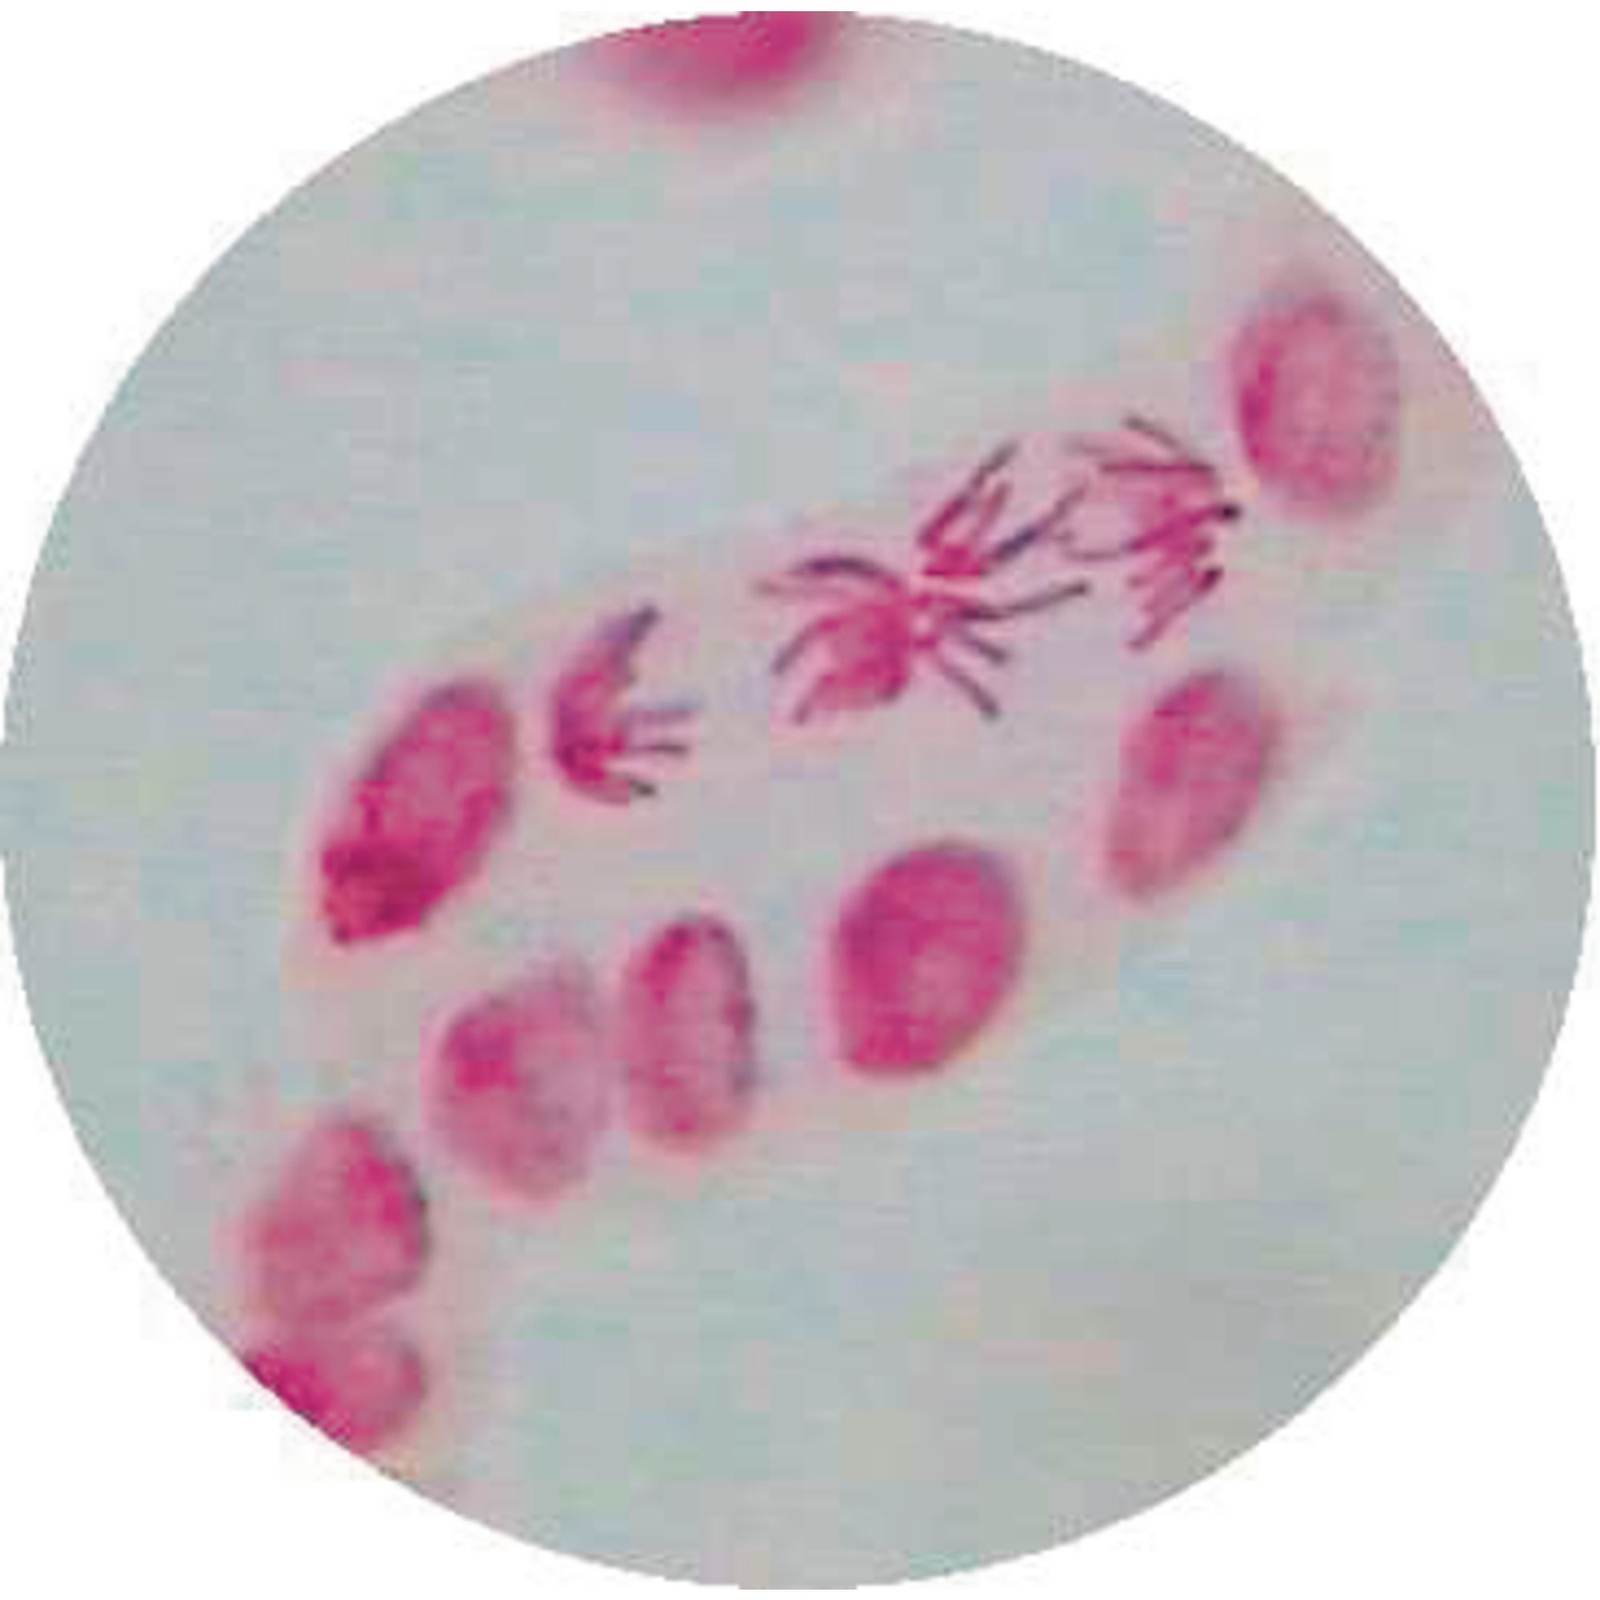 Allium Root Tip Stained For Mitosis